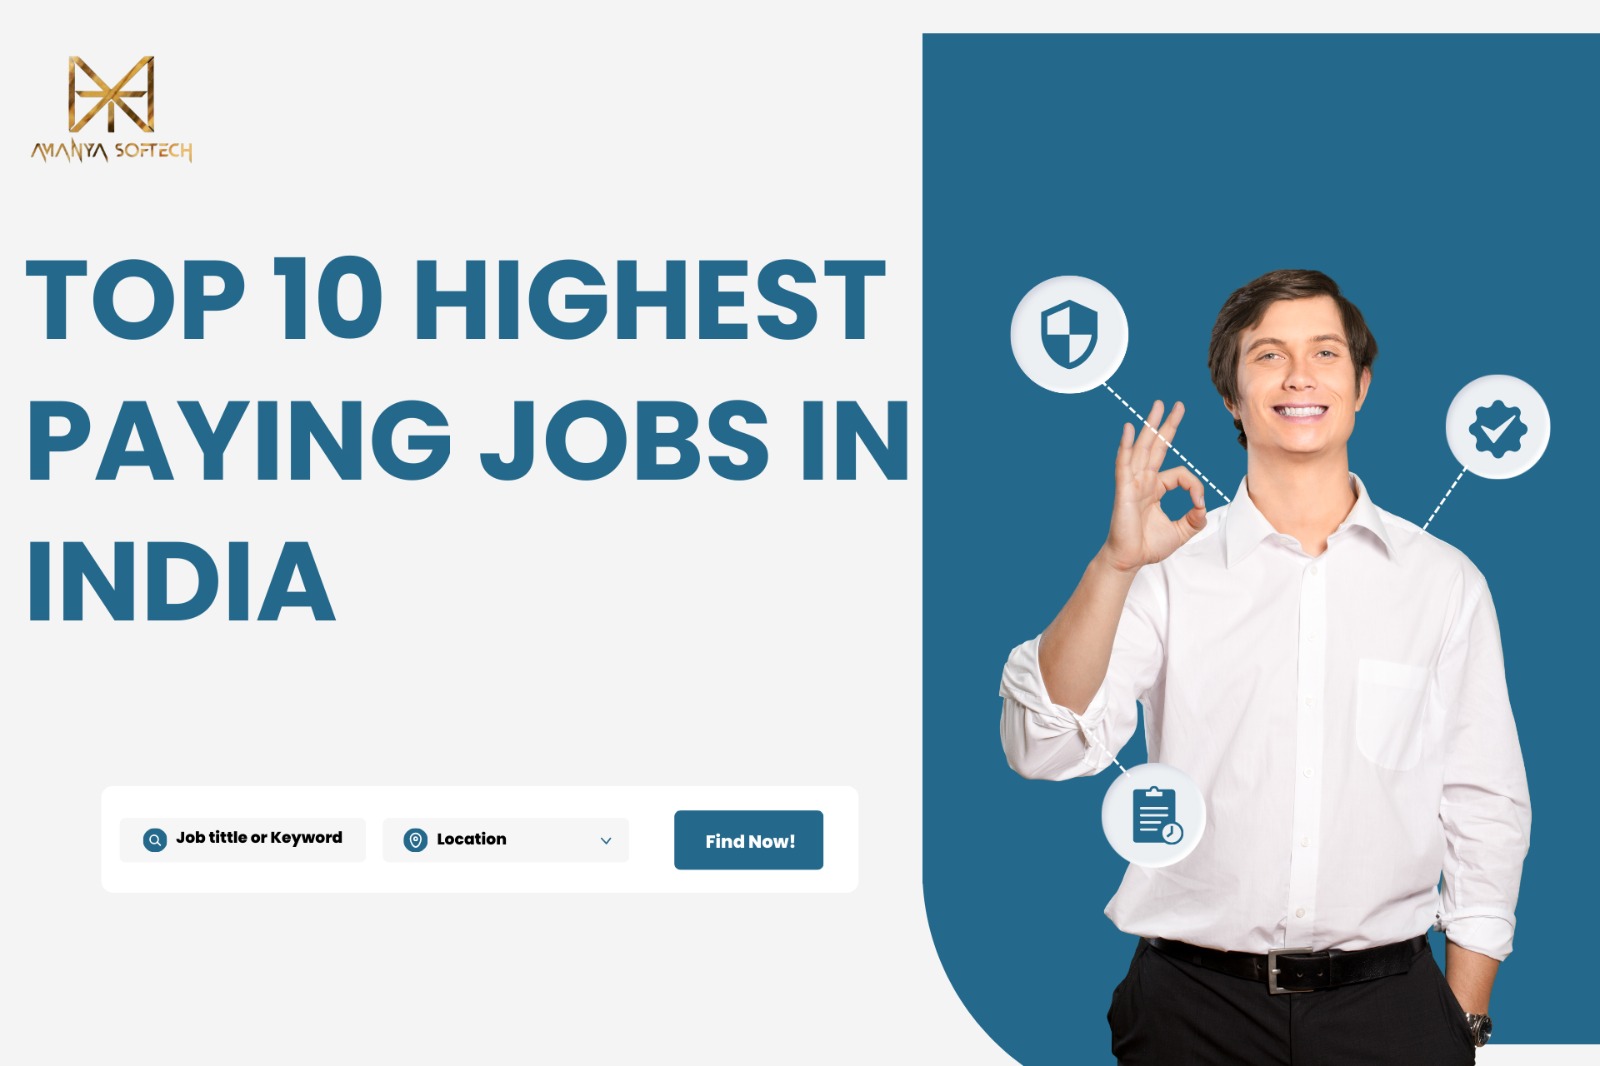 Top 10 highest paying jobs in india